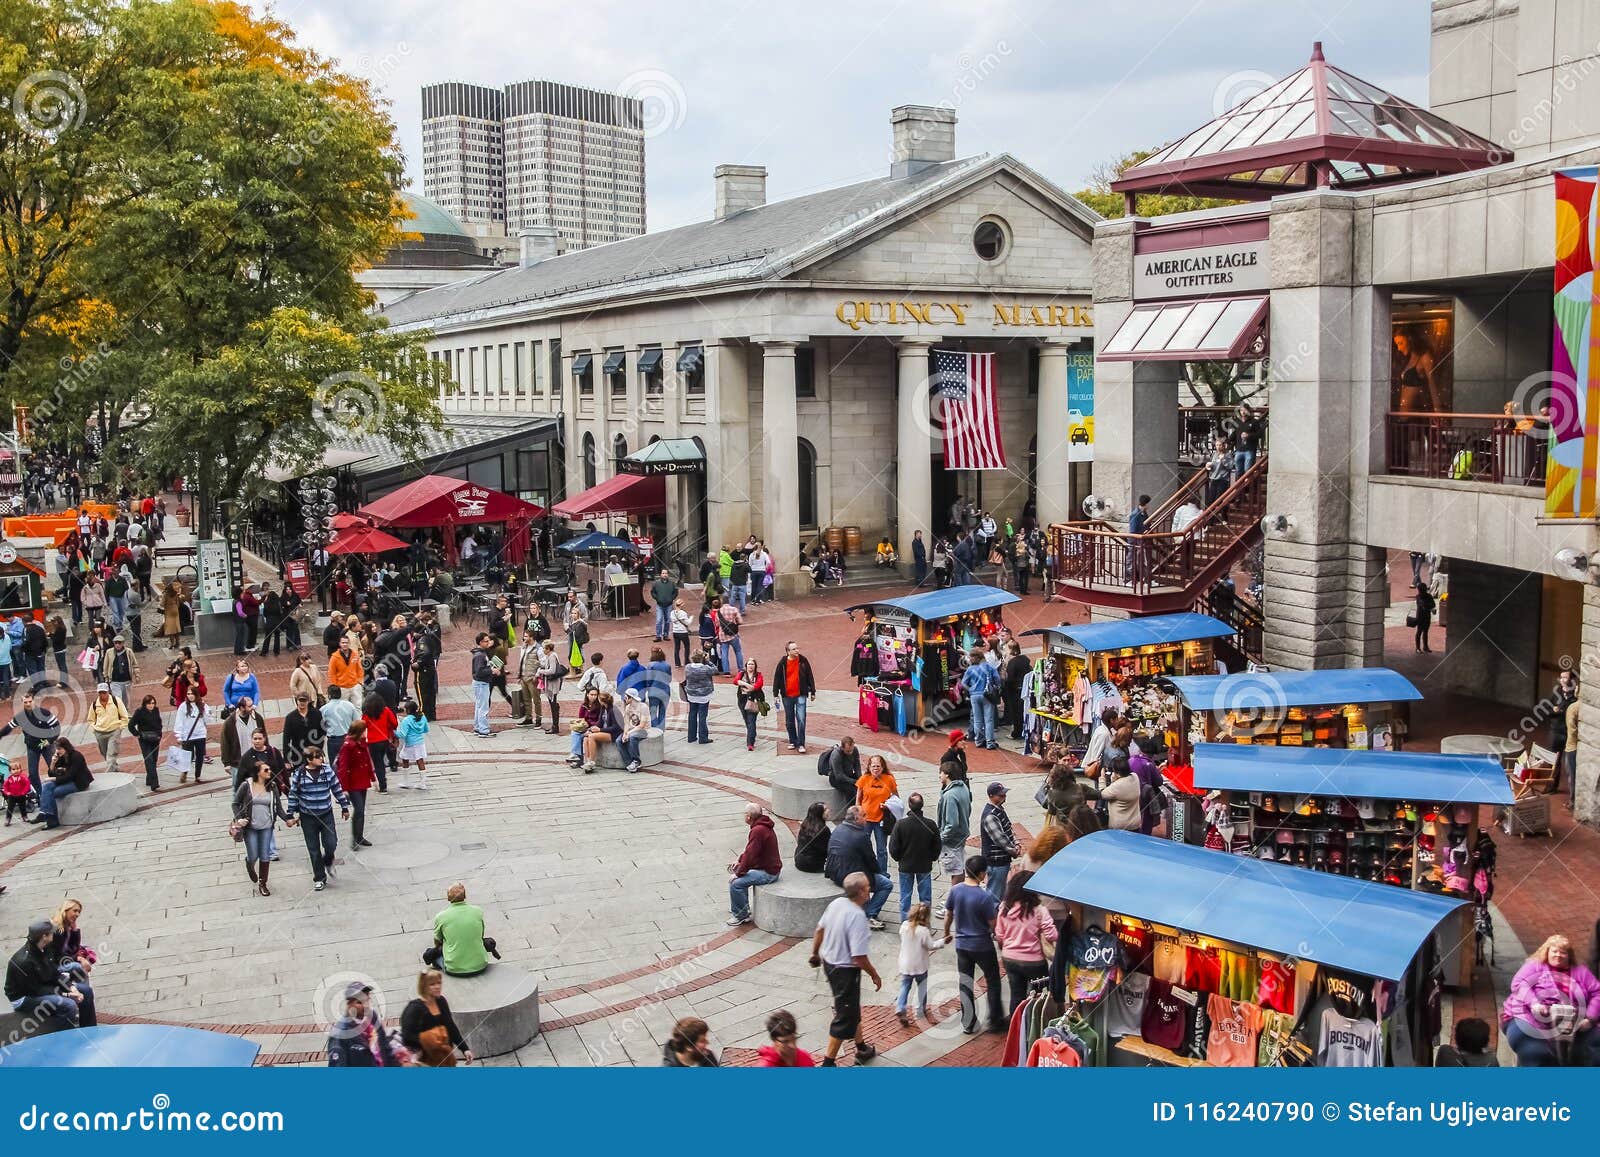 Quincy Market with People Shopping Editorial Image - Image of famous